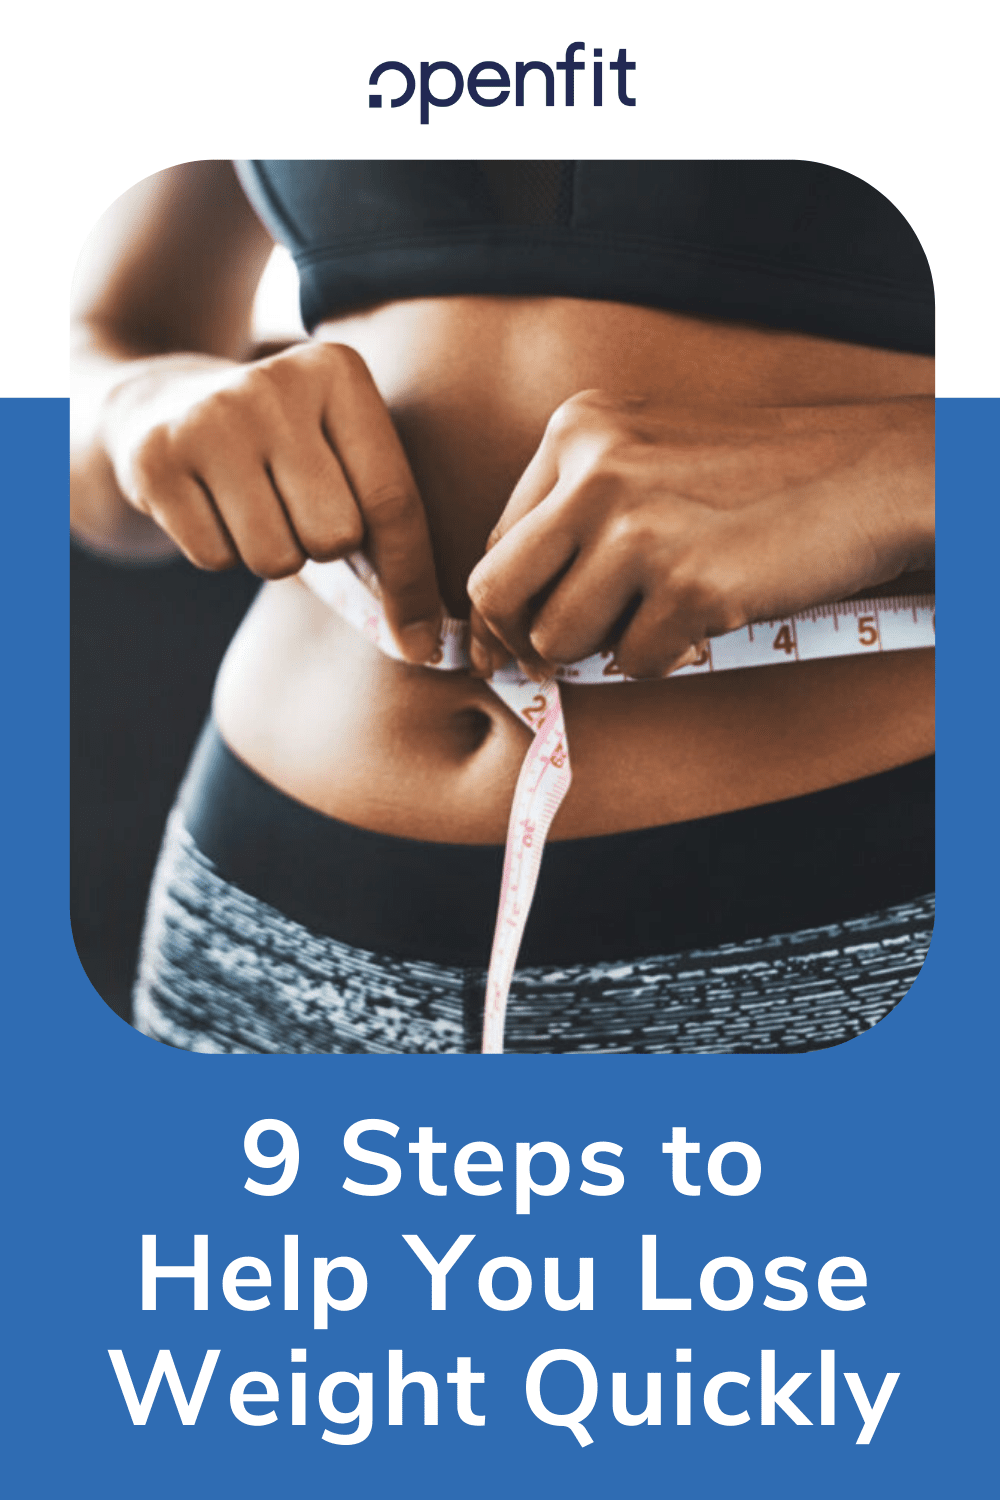 9 Steps to Help You Lose Weight Quickly